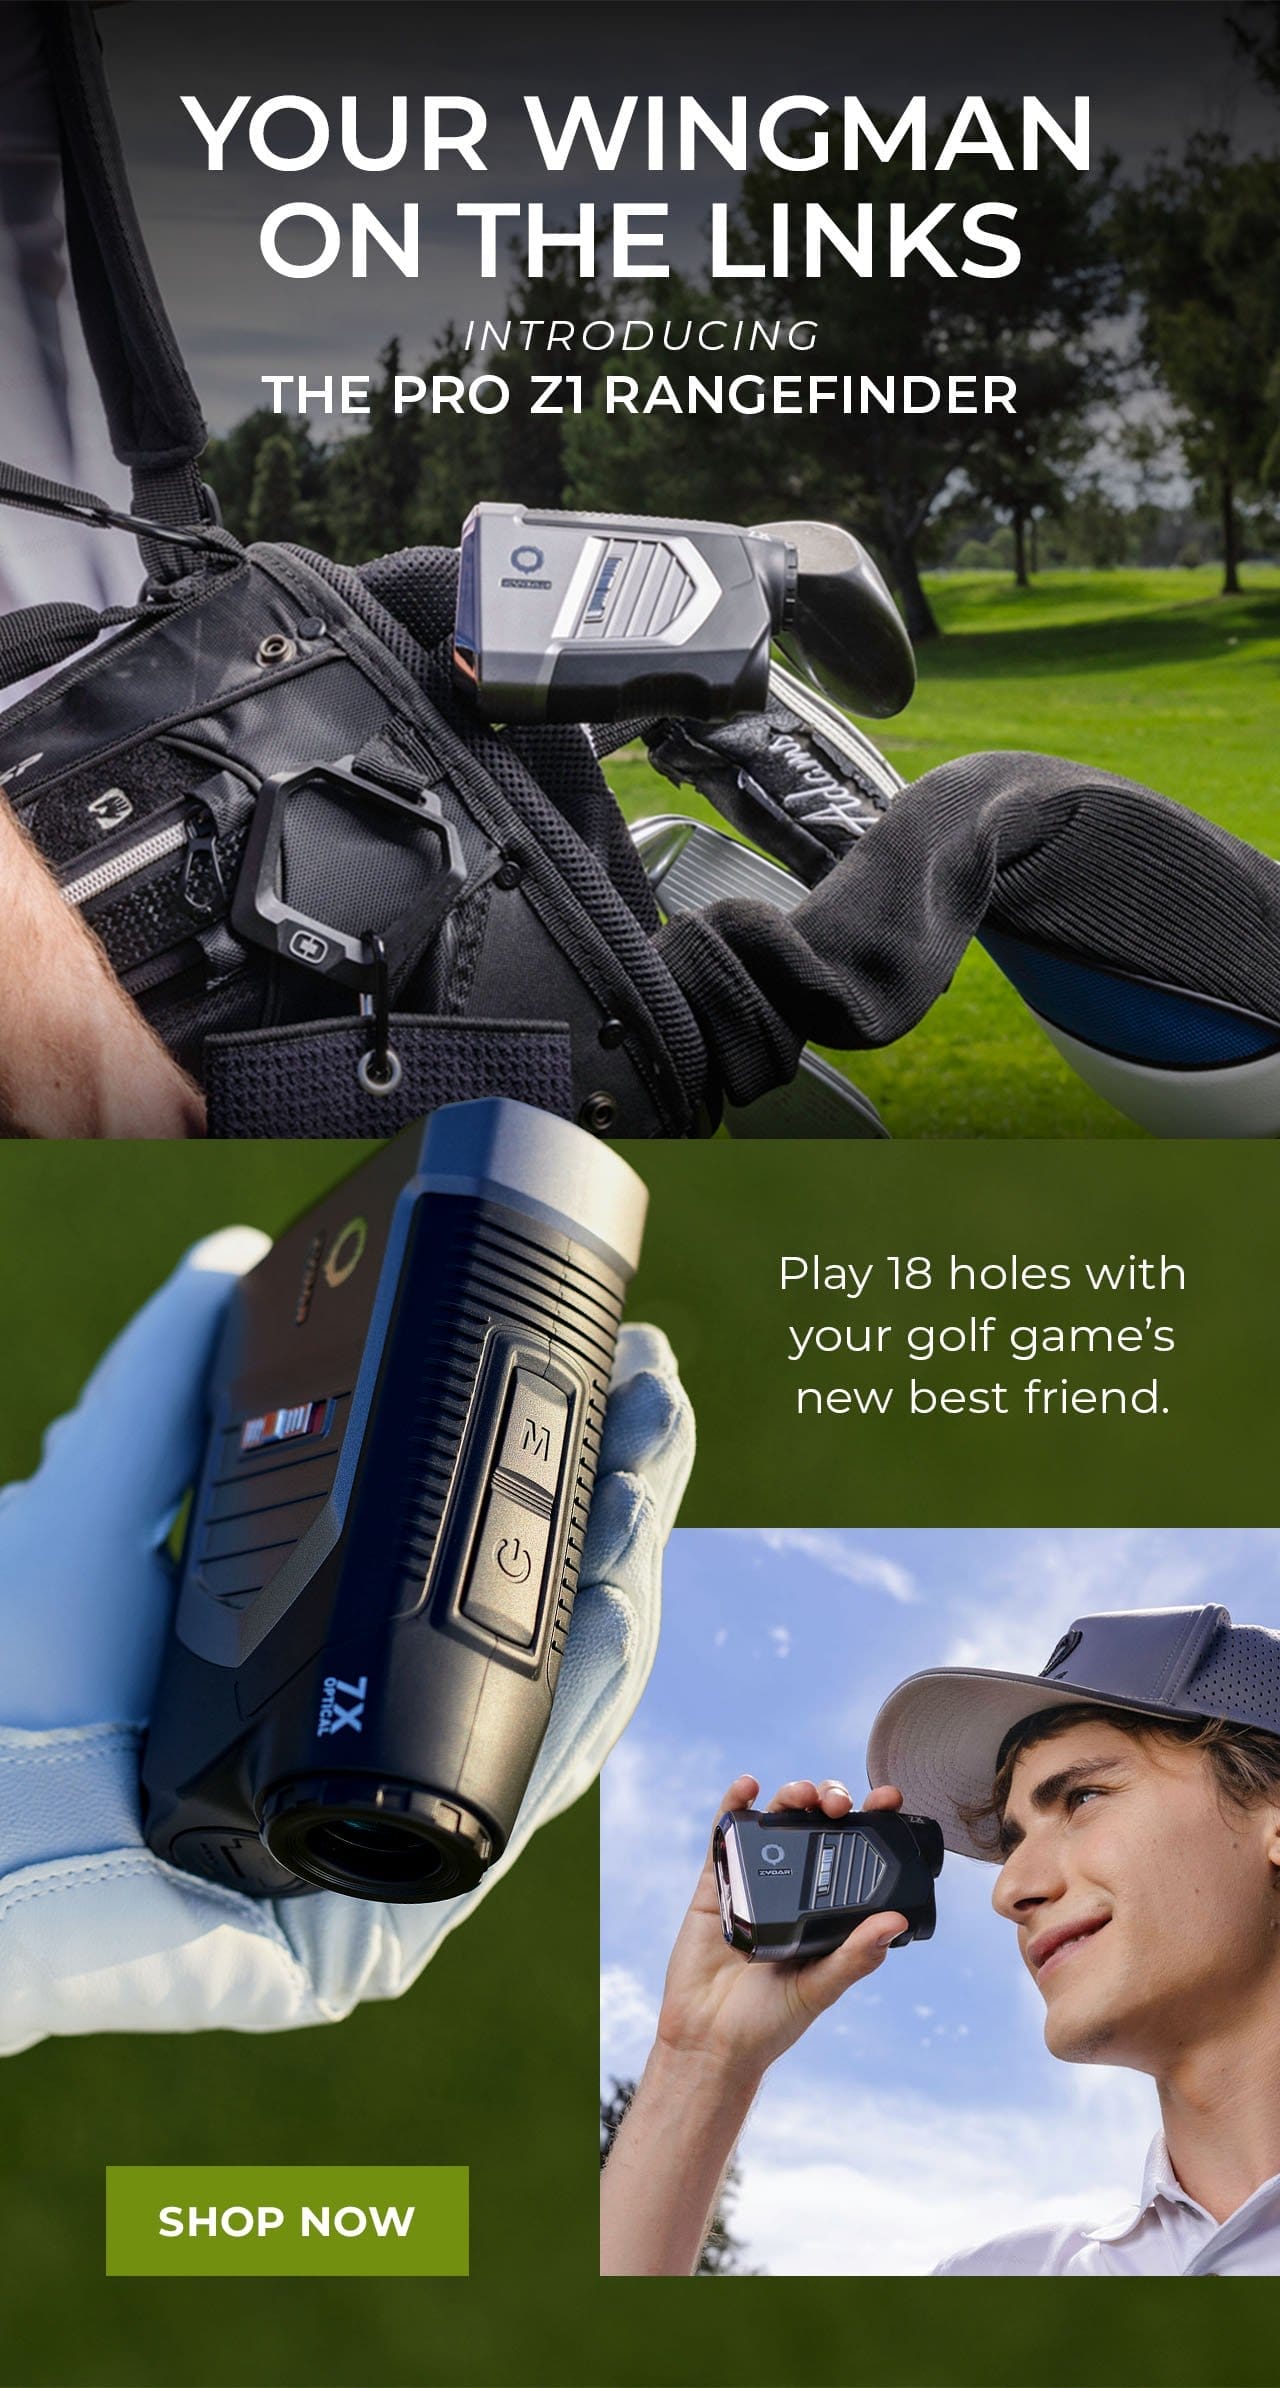 Introducing the Pro Z1 Rangefinder | SHOP NOW